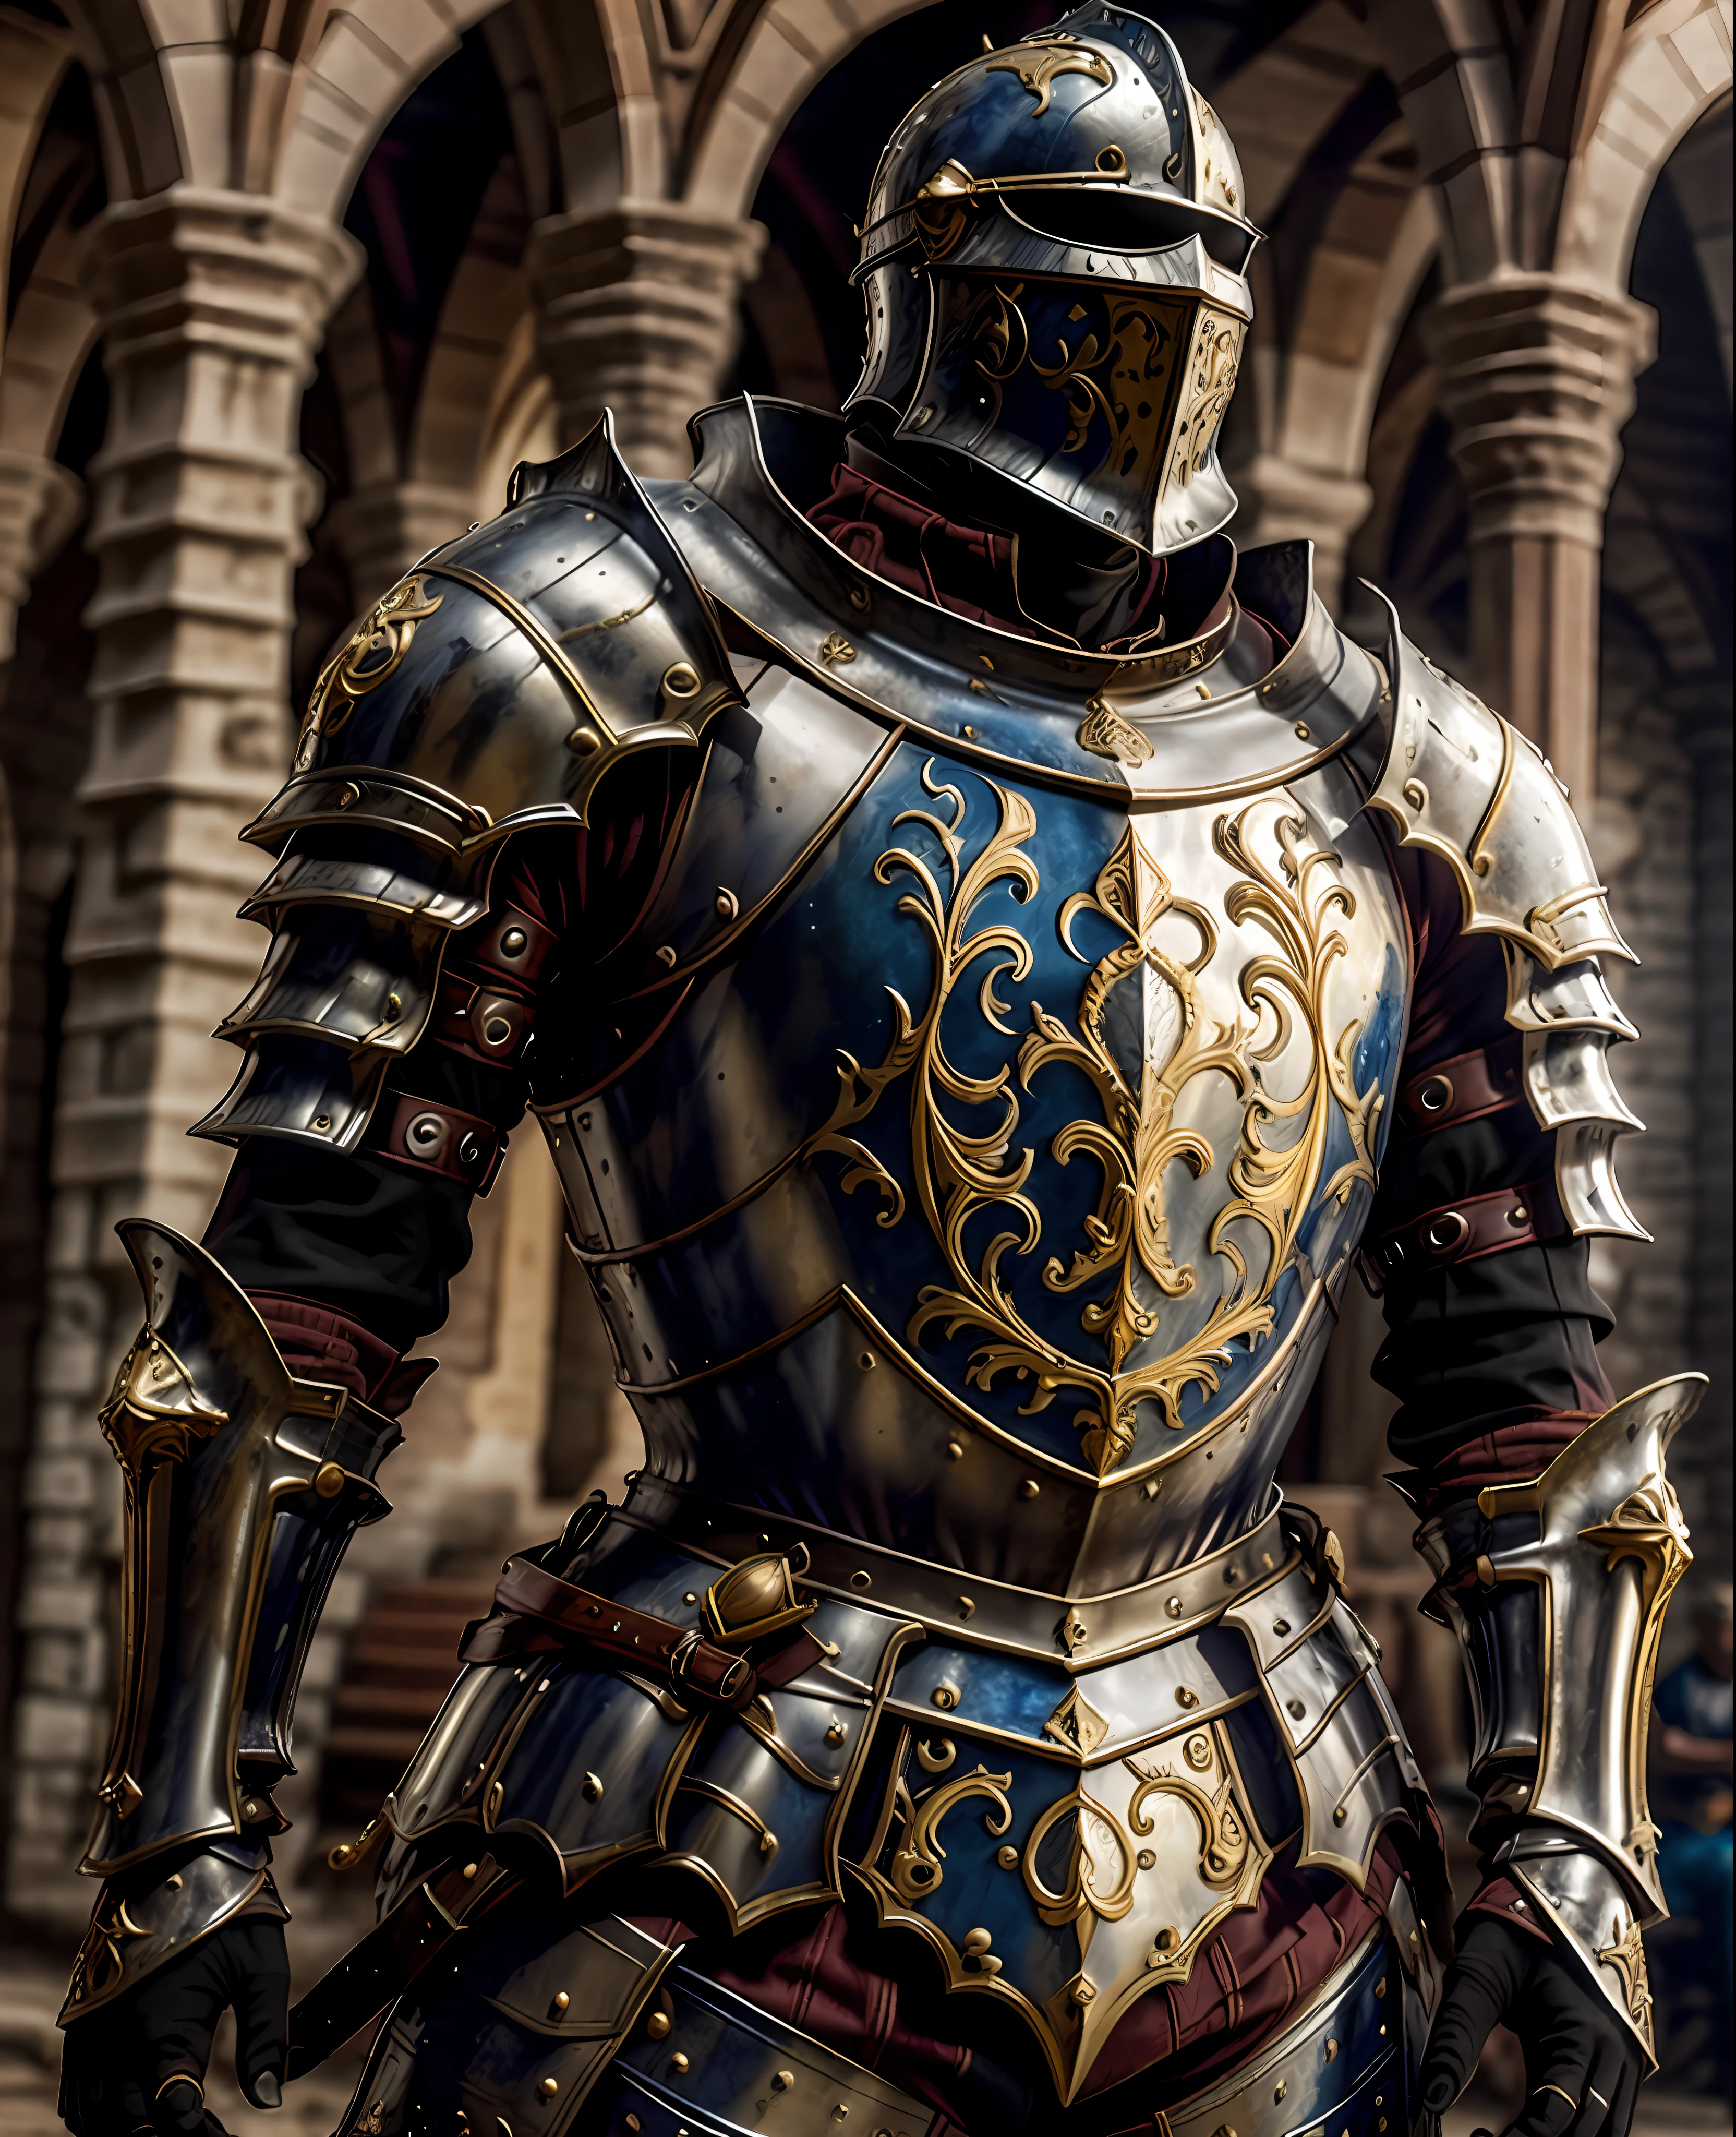 Masterpiece artwork, best qualityer, barroque, realisitic, Medieval Templar armor of the Crusades, upperbody, gazing at viewer